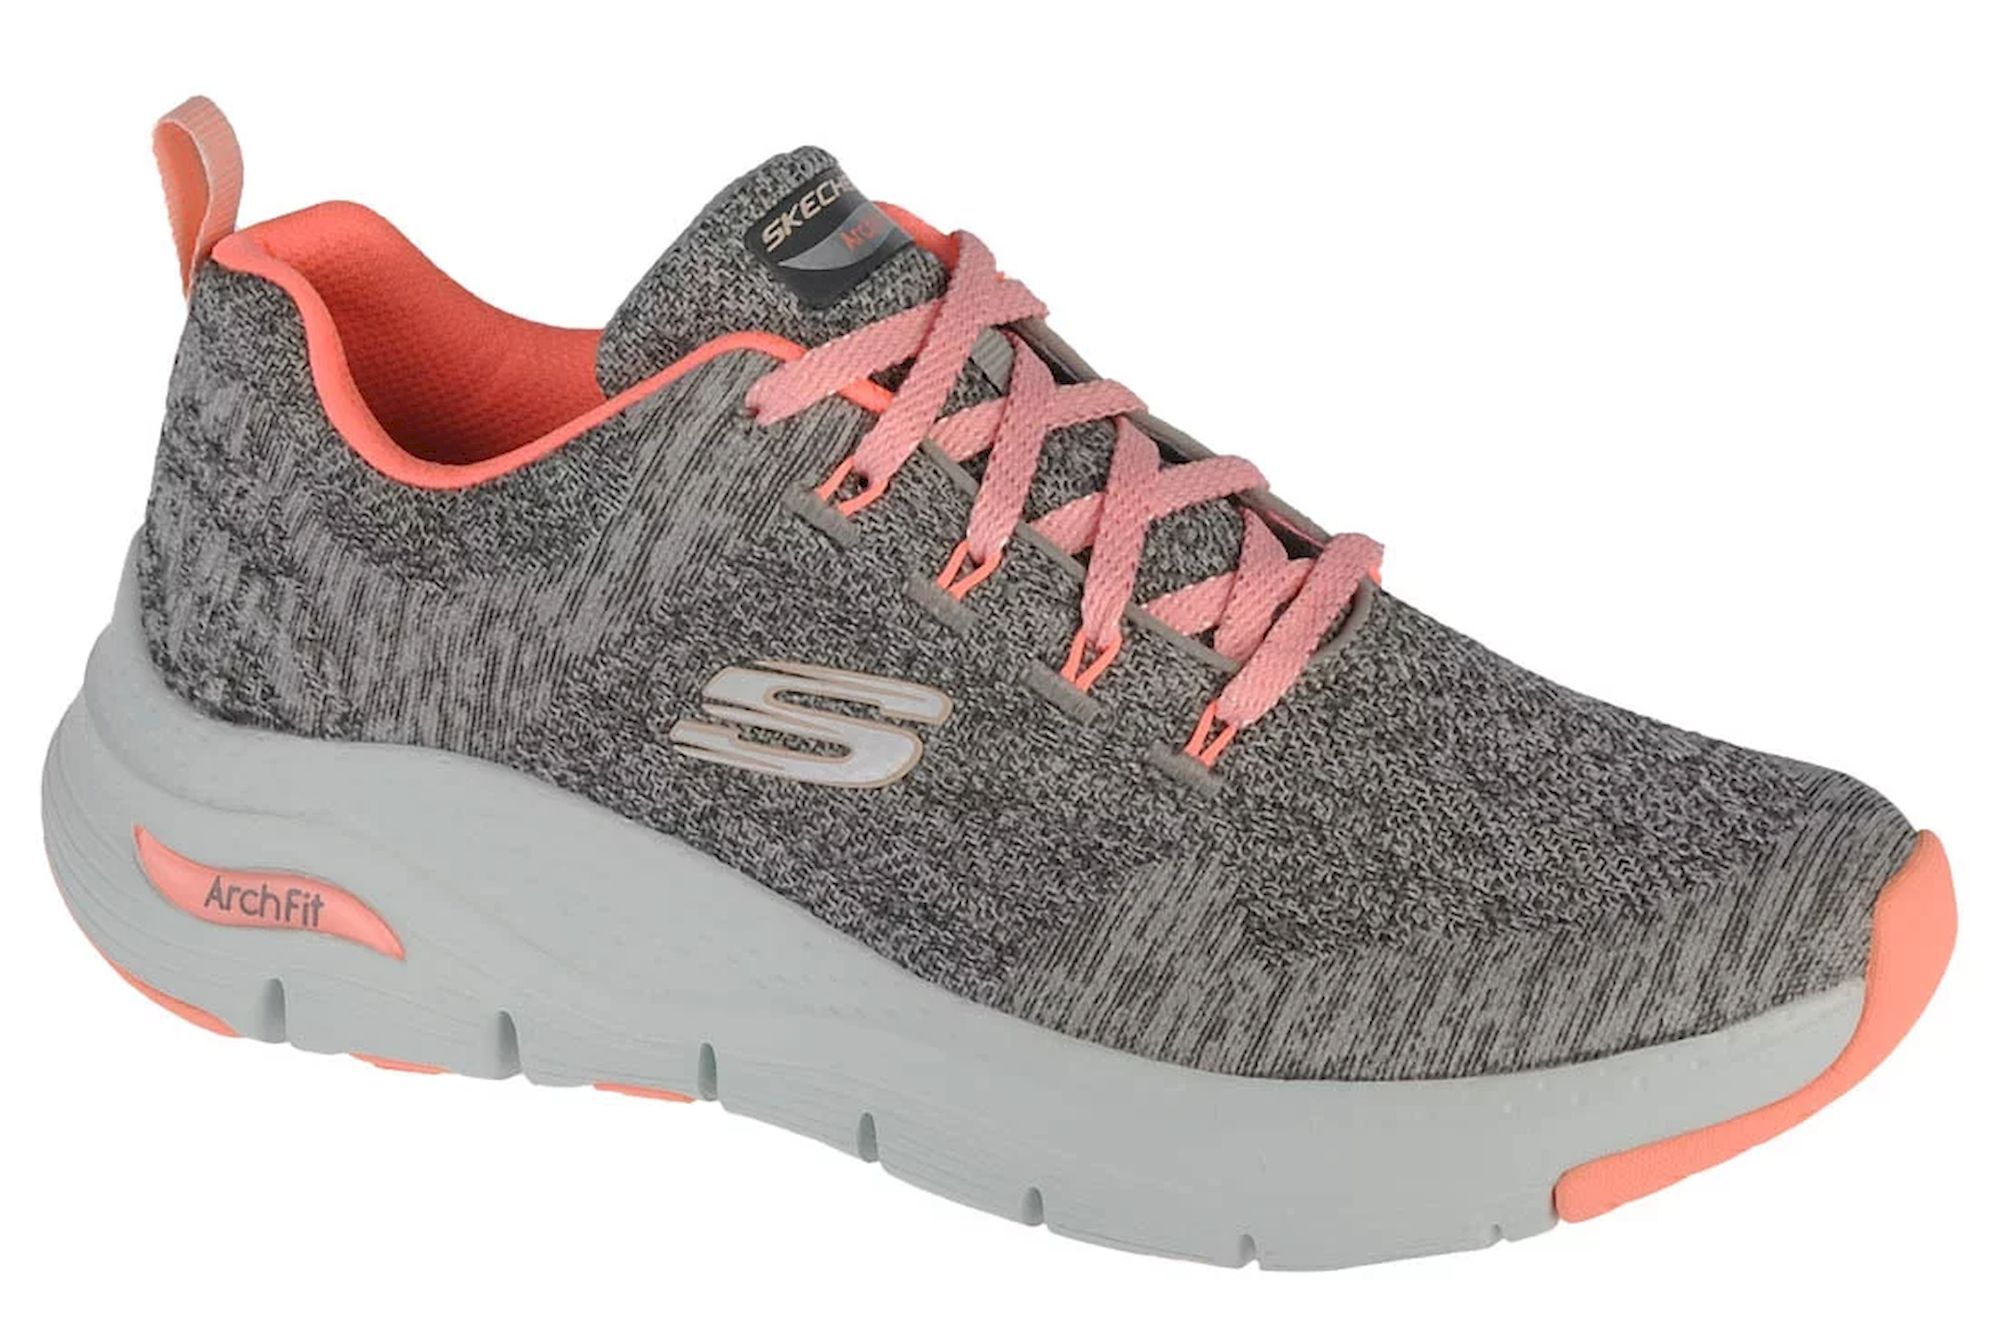 Skechers Arch Fit - Comfy Wave - Shoes - Women's | Hardloop